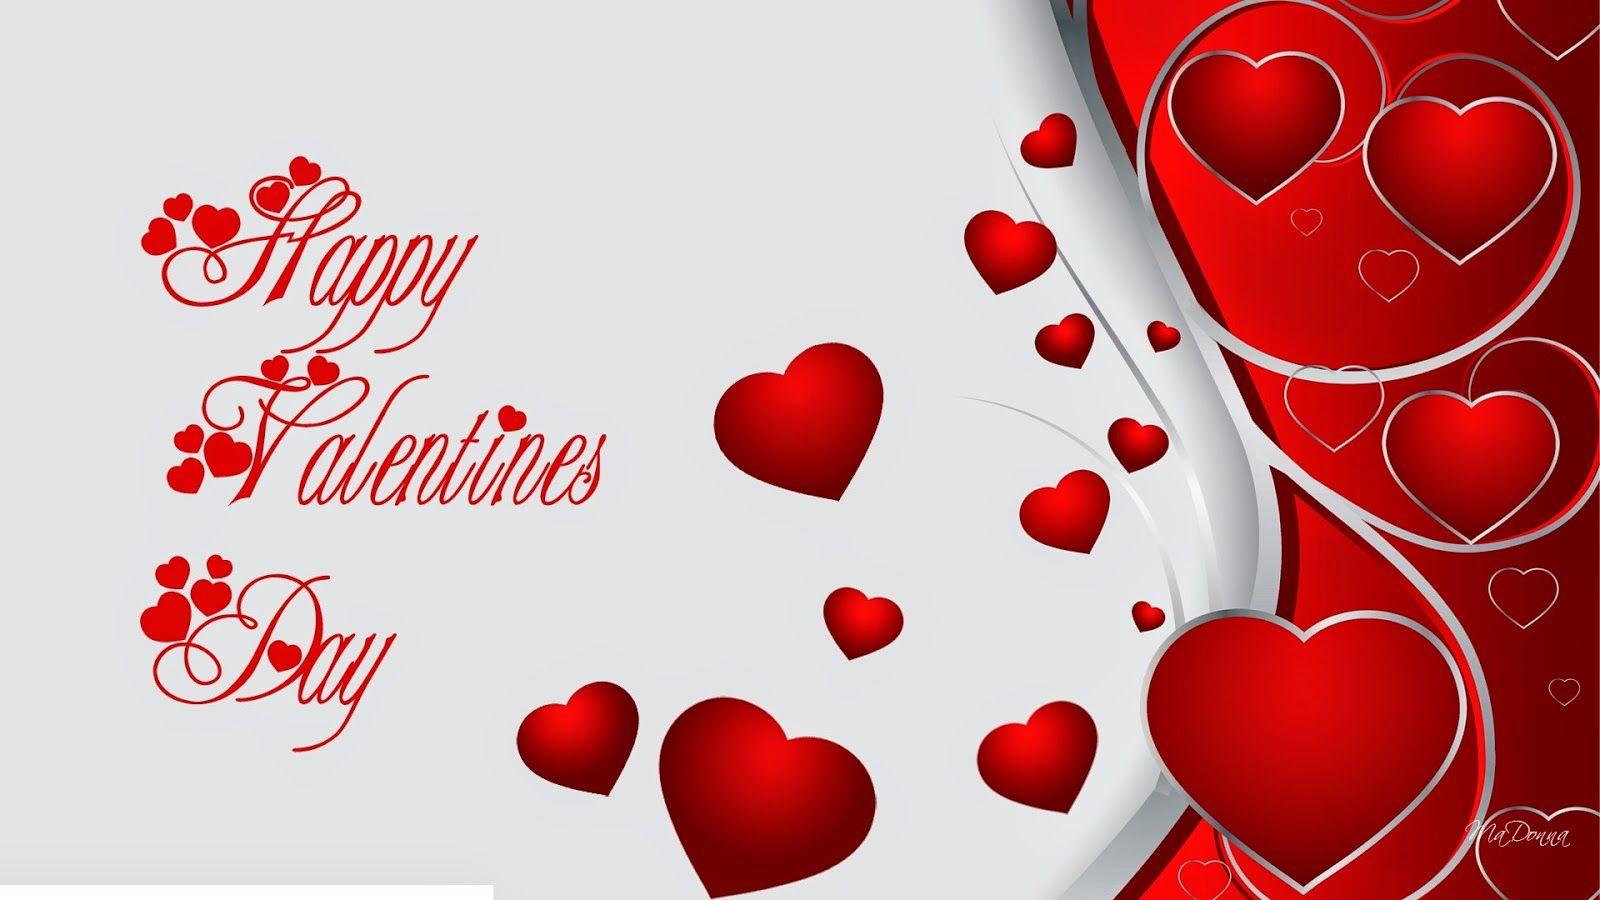 Happy Valentines Day Greetings Cards Free. Valentine's